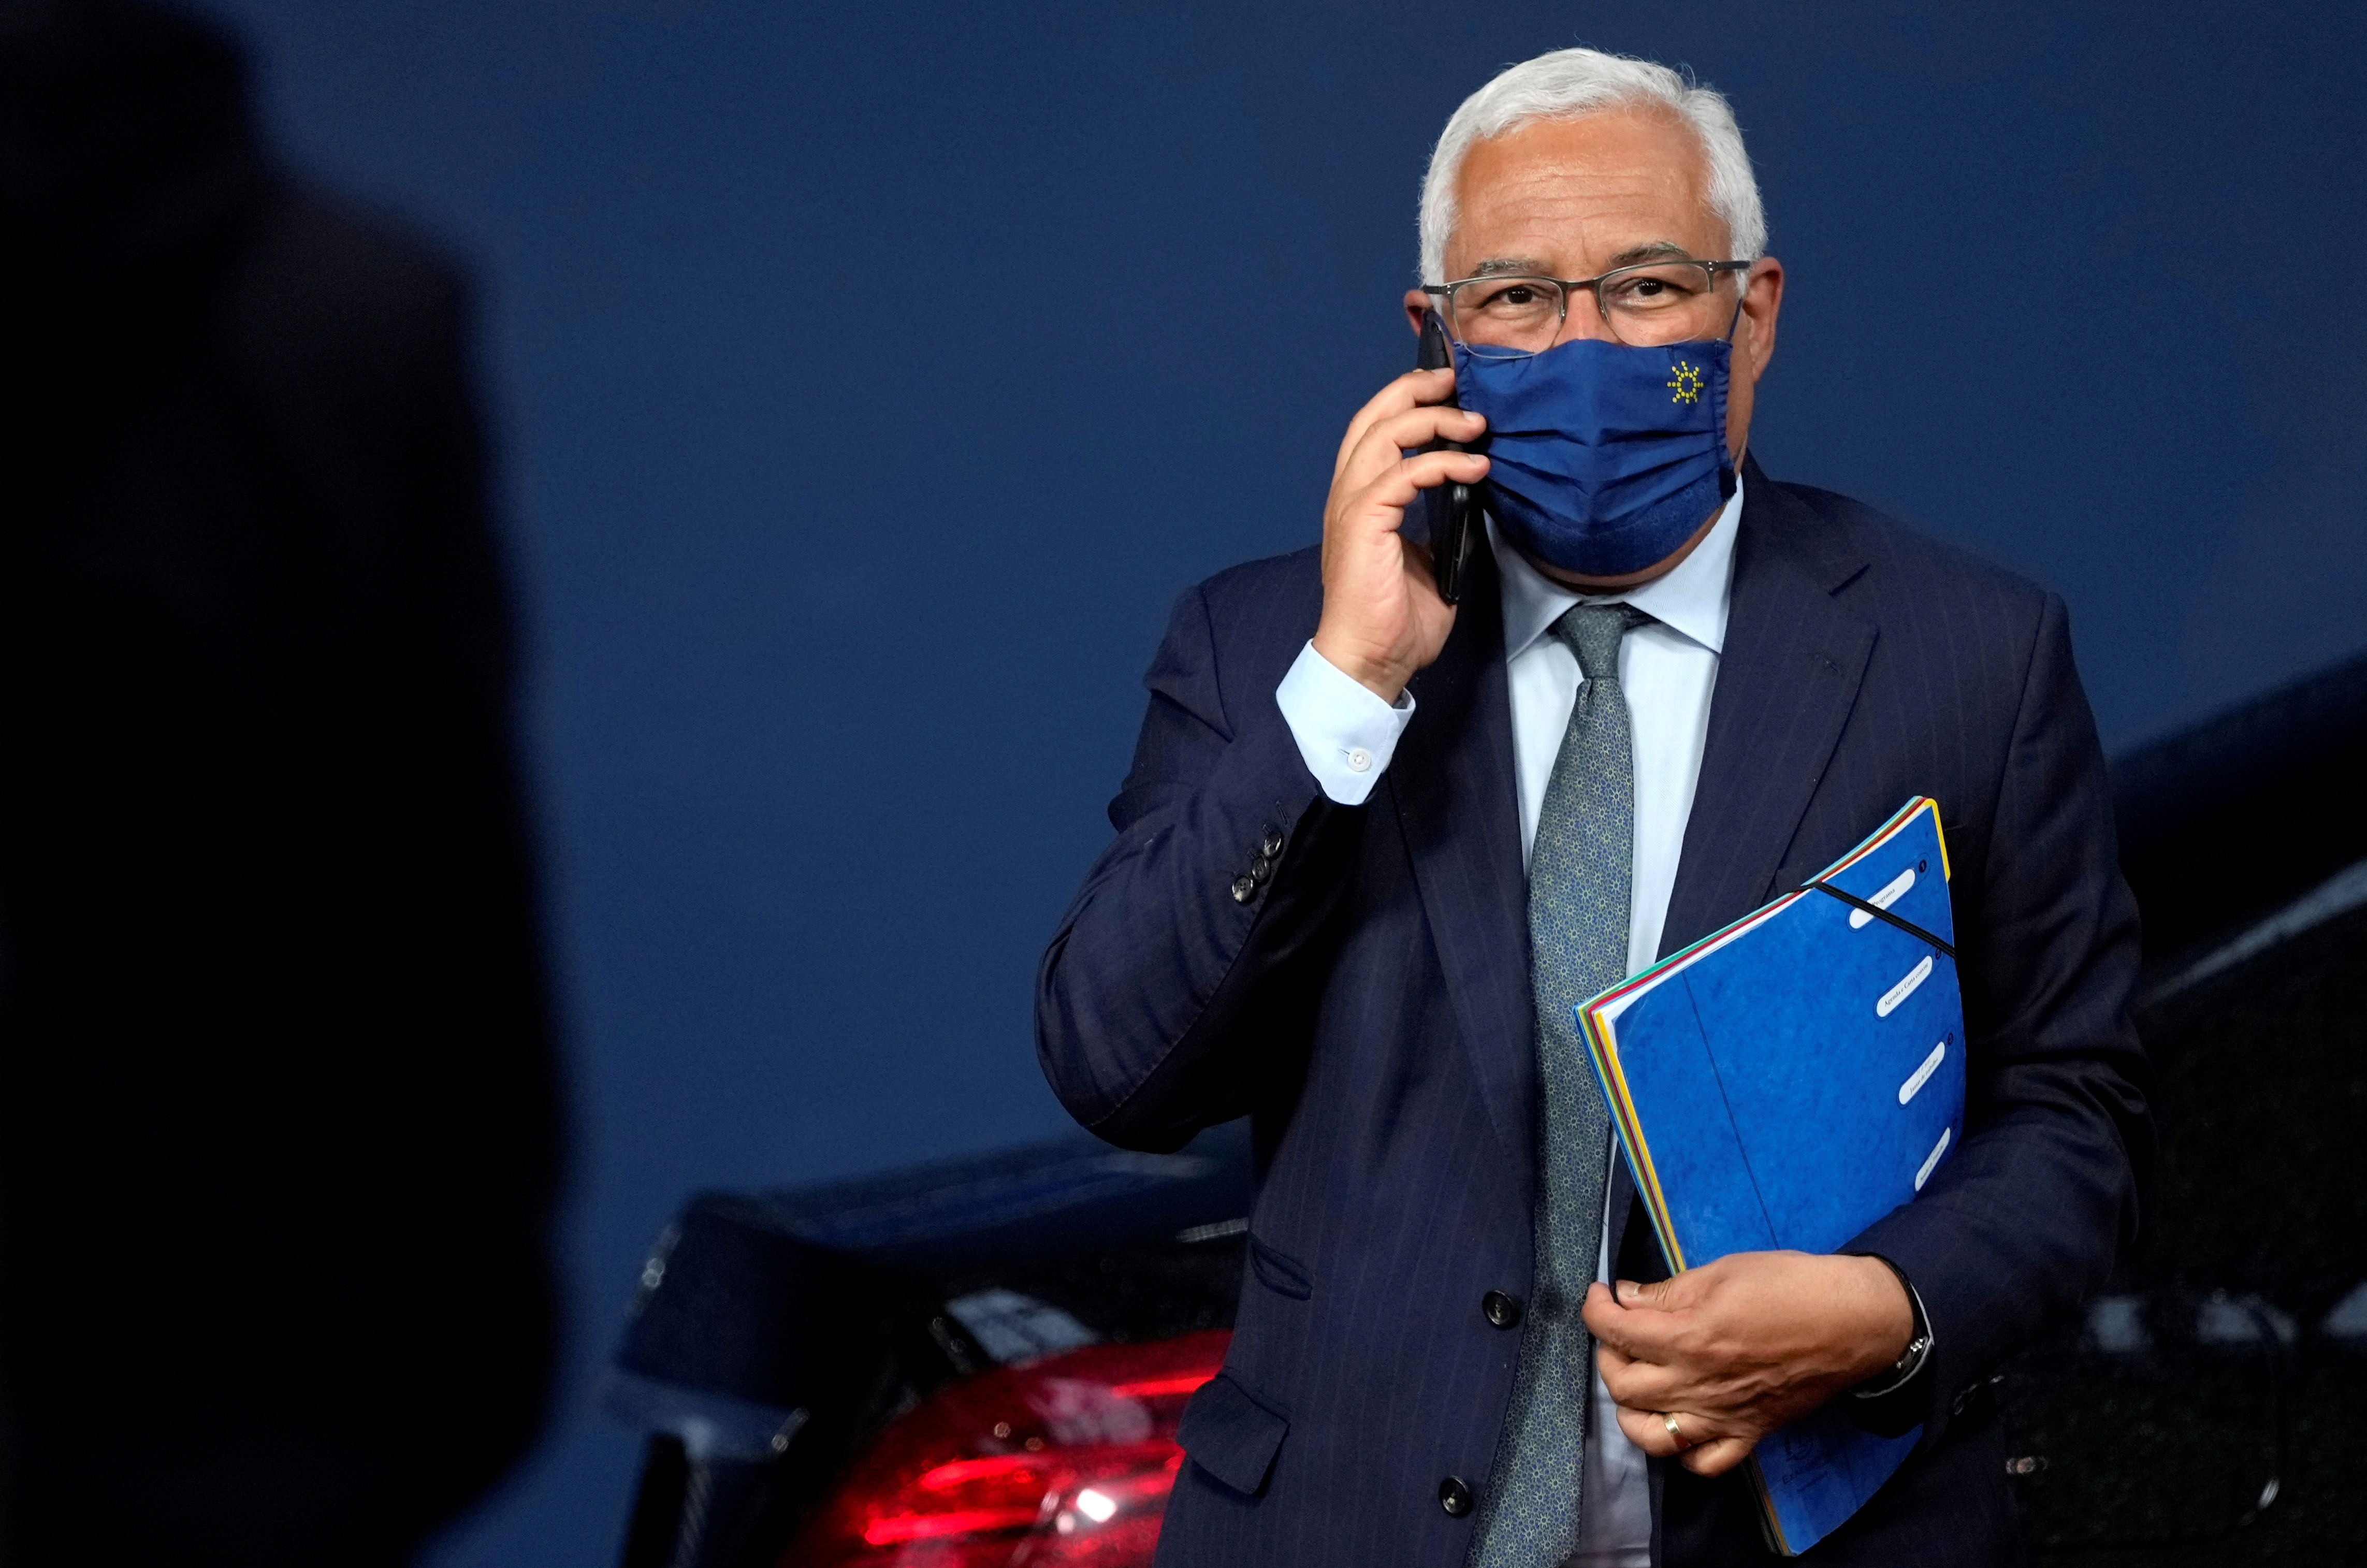 Portugal's Prime Minister Antonio Costa arrives for an EU summit in Brussels